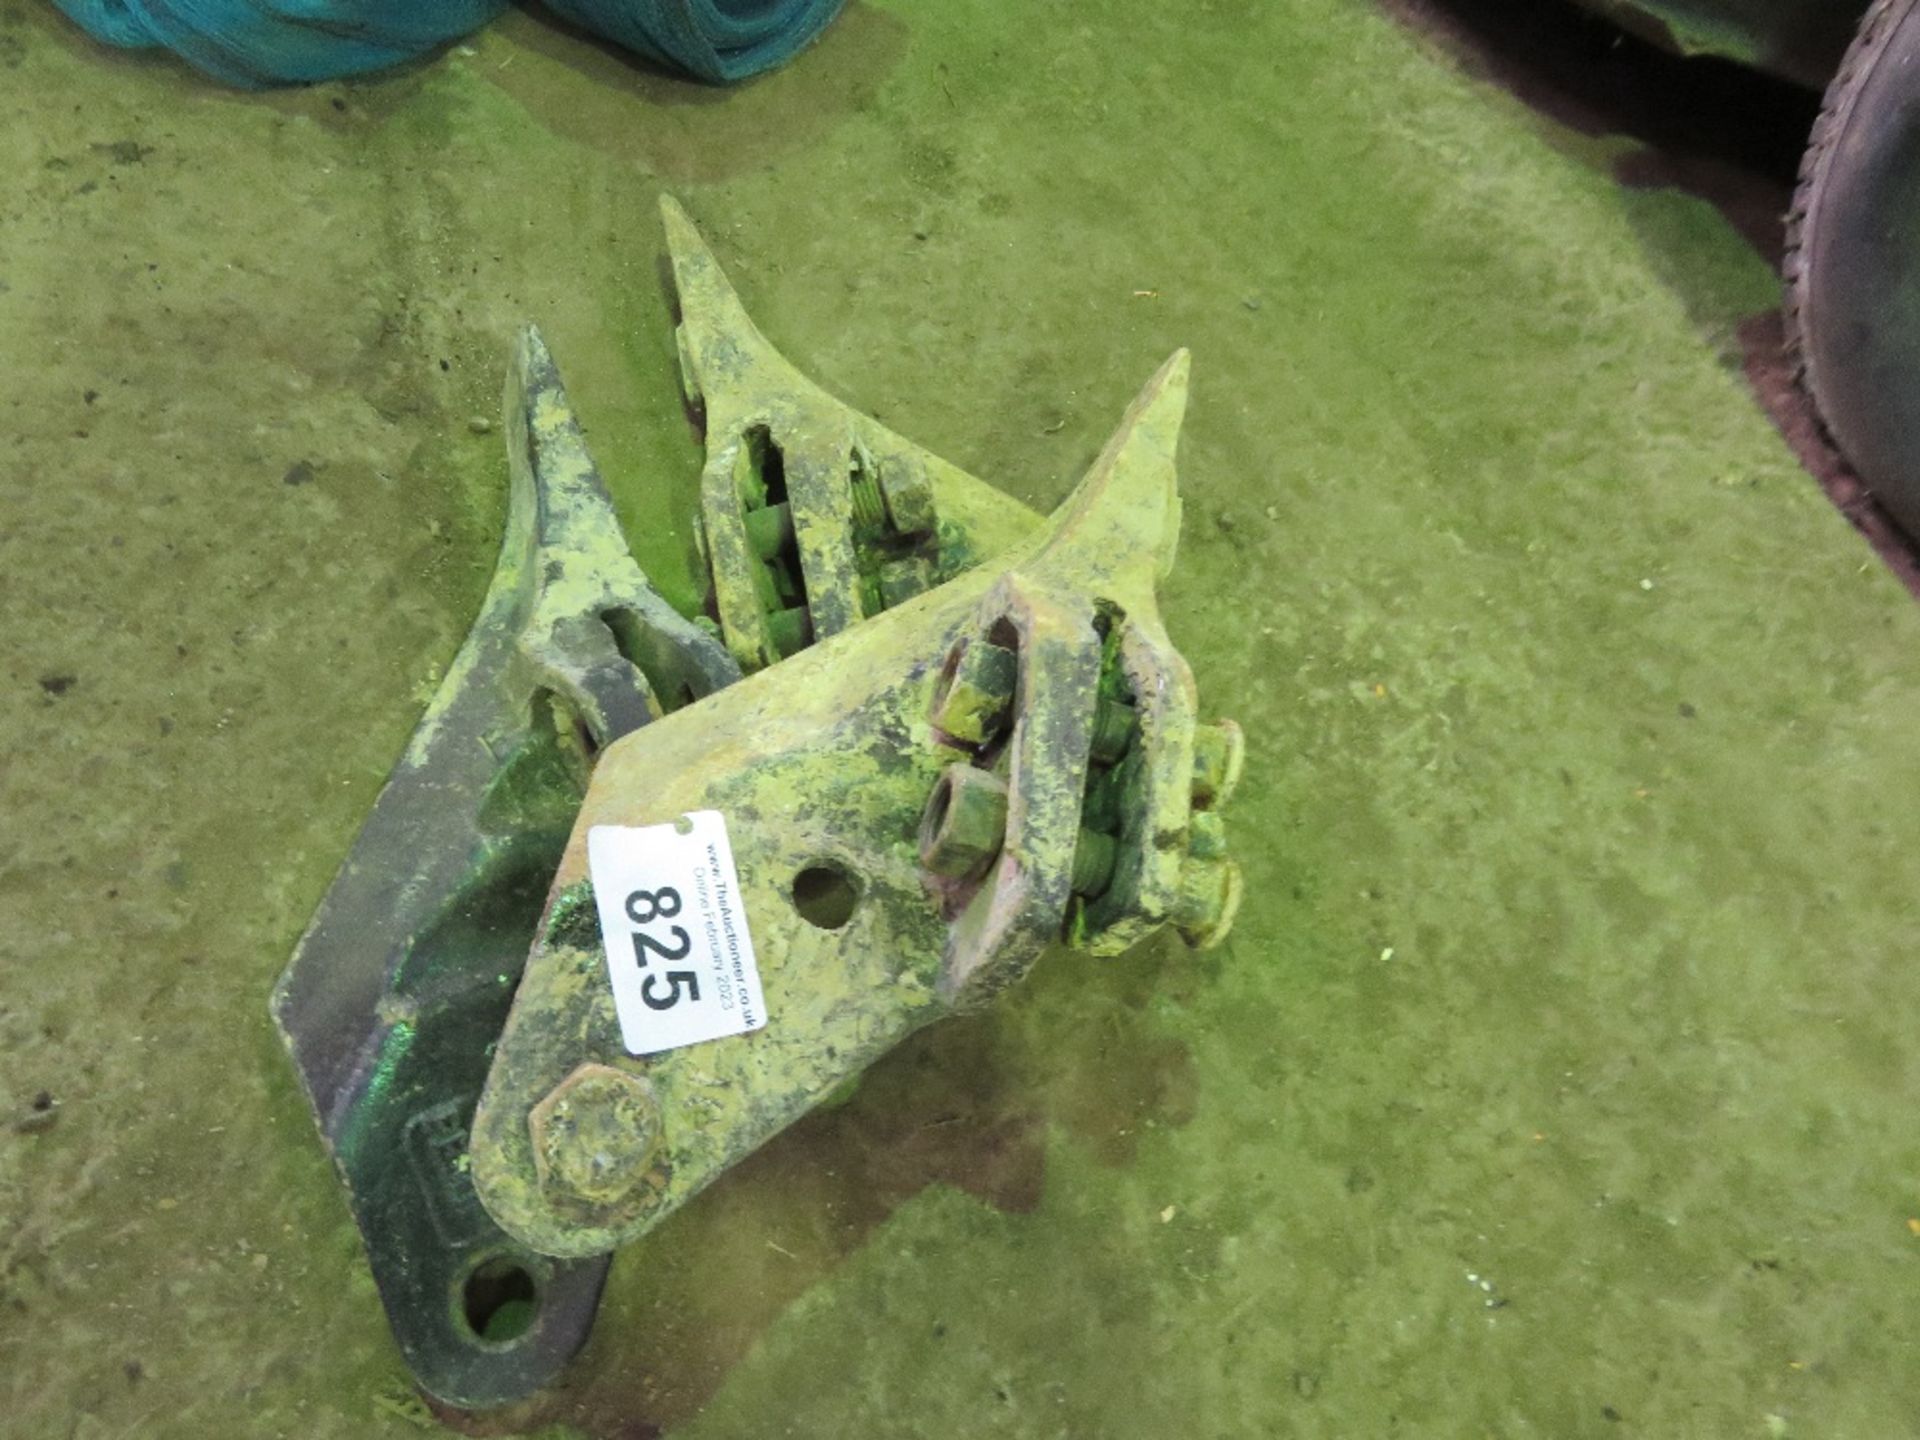 3 X BUCKET SIDE CUTTER TEETH. COMPANY LIQUIDATION STOCK. THIS LOT IS SOLD UNDER THE AUCTIONEERS MA - Image 2 of 3